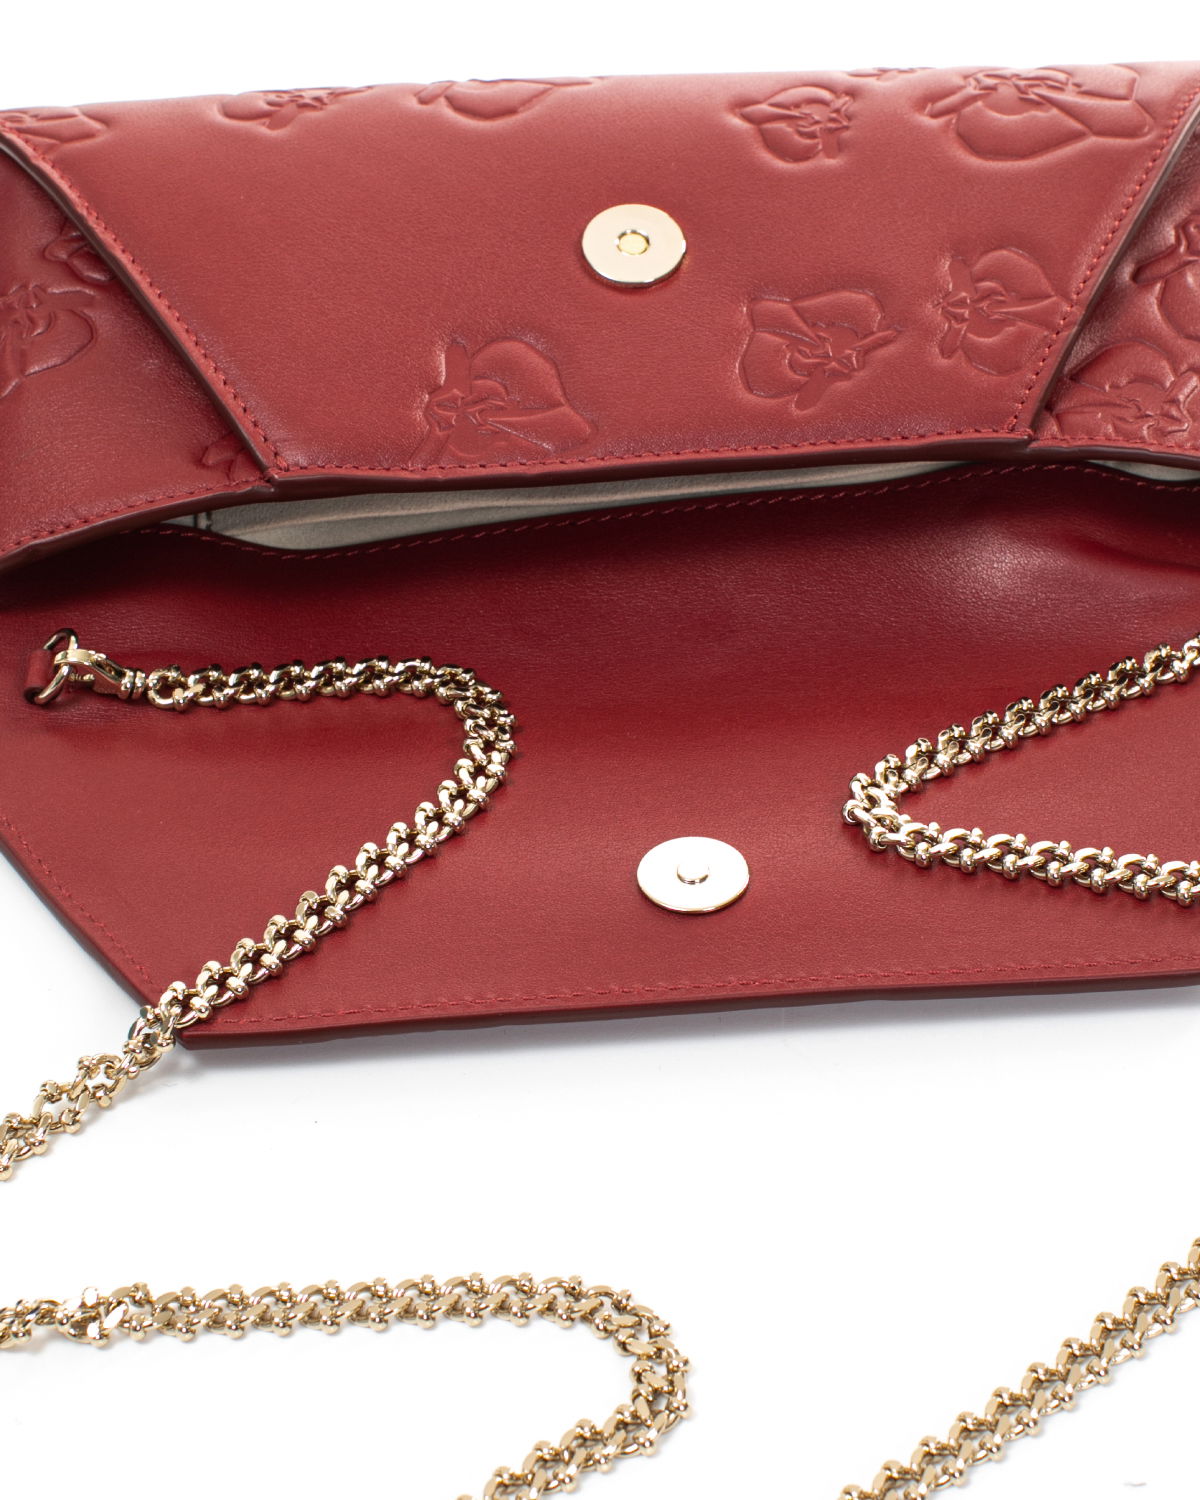 Red embossed leather envelope clutch | Sale | Genny